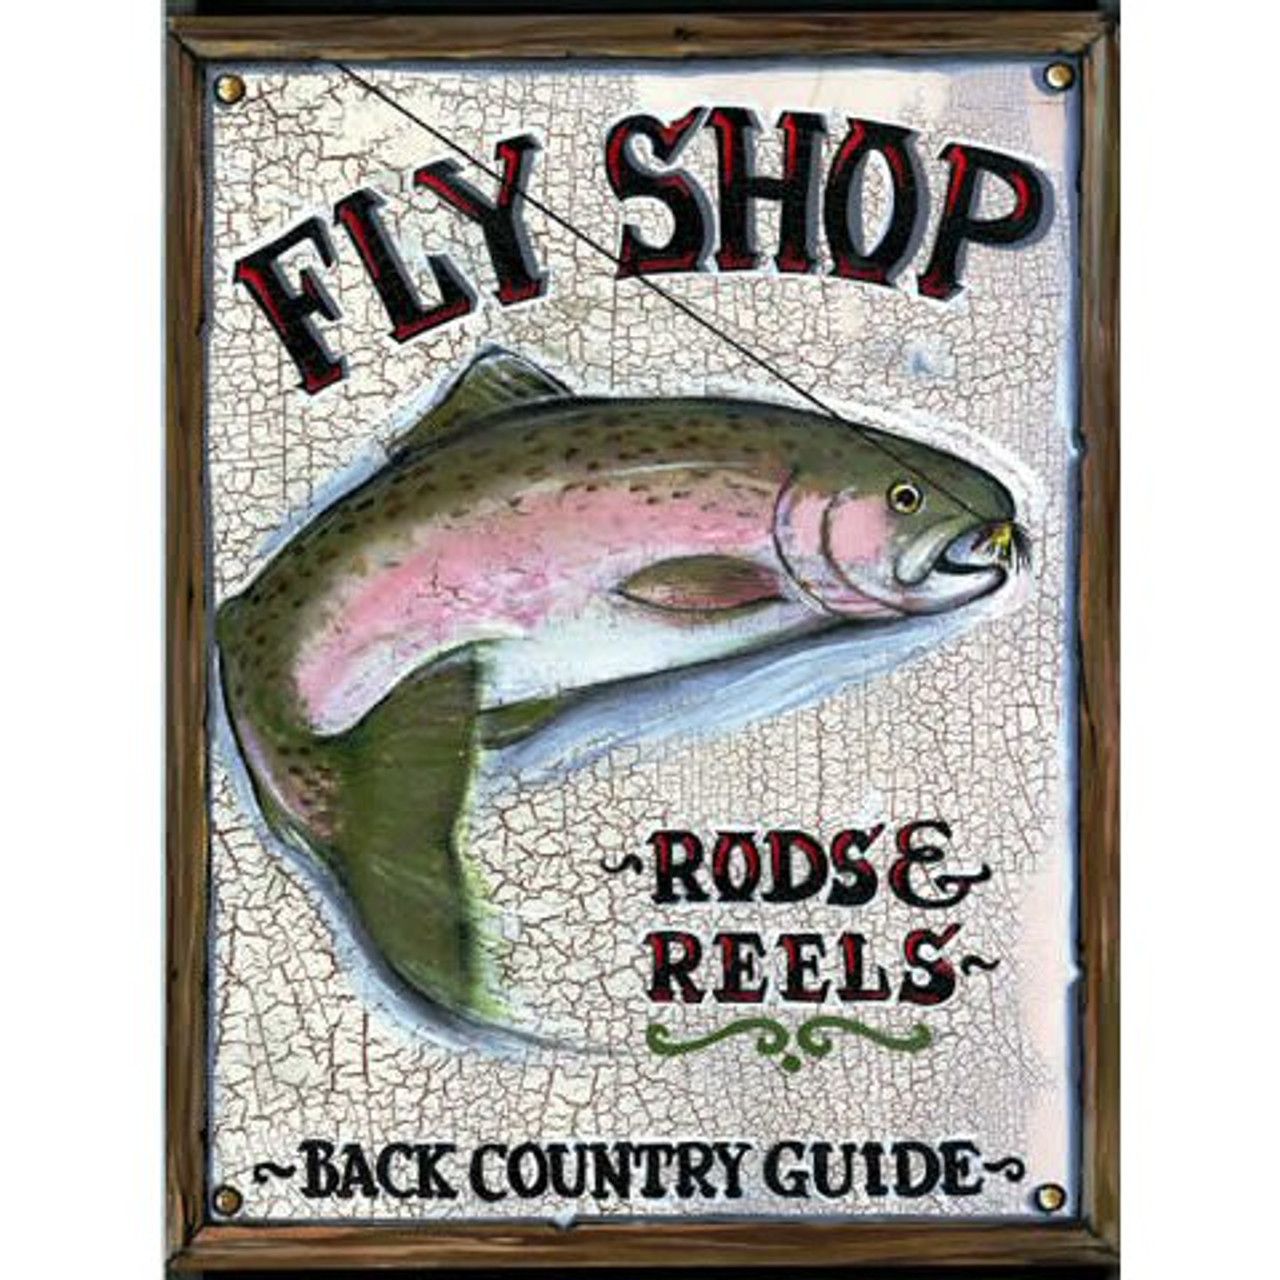 Custom Fly Shop Rods and Reels Vintage Style Metal Sign - Personalized  Antique Aluminum Sign